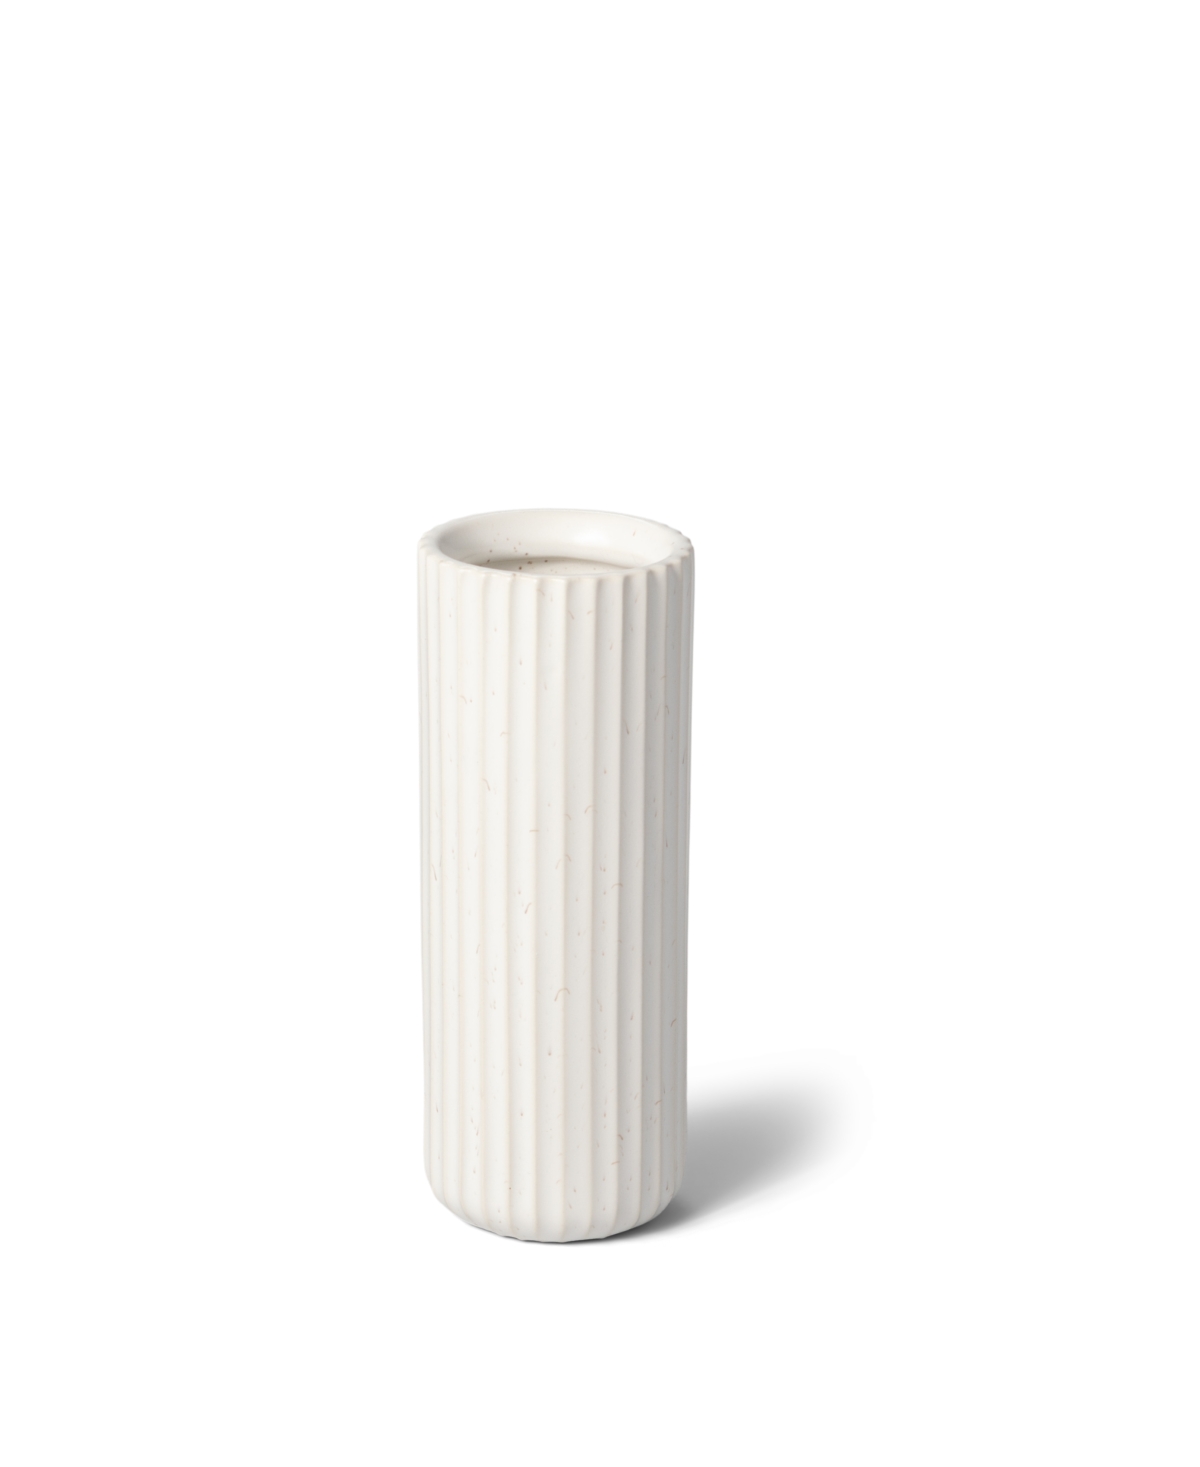 Fable Tall Bud Vase In White